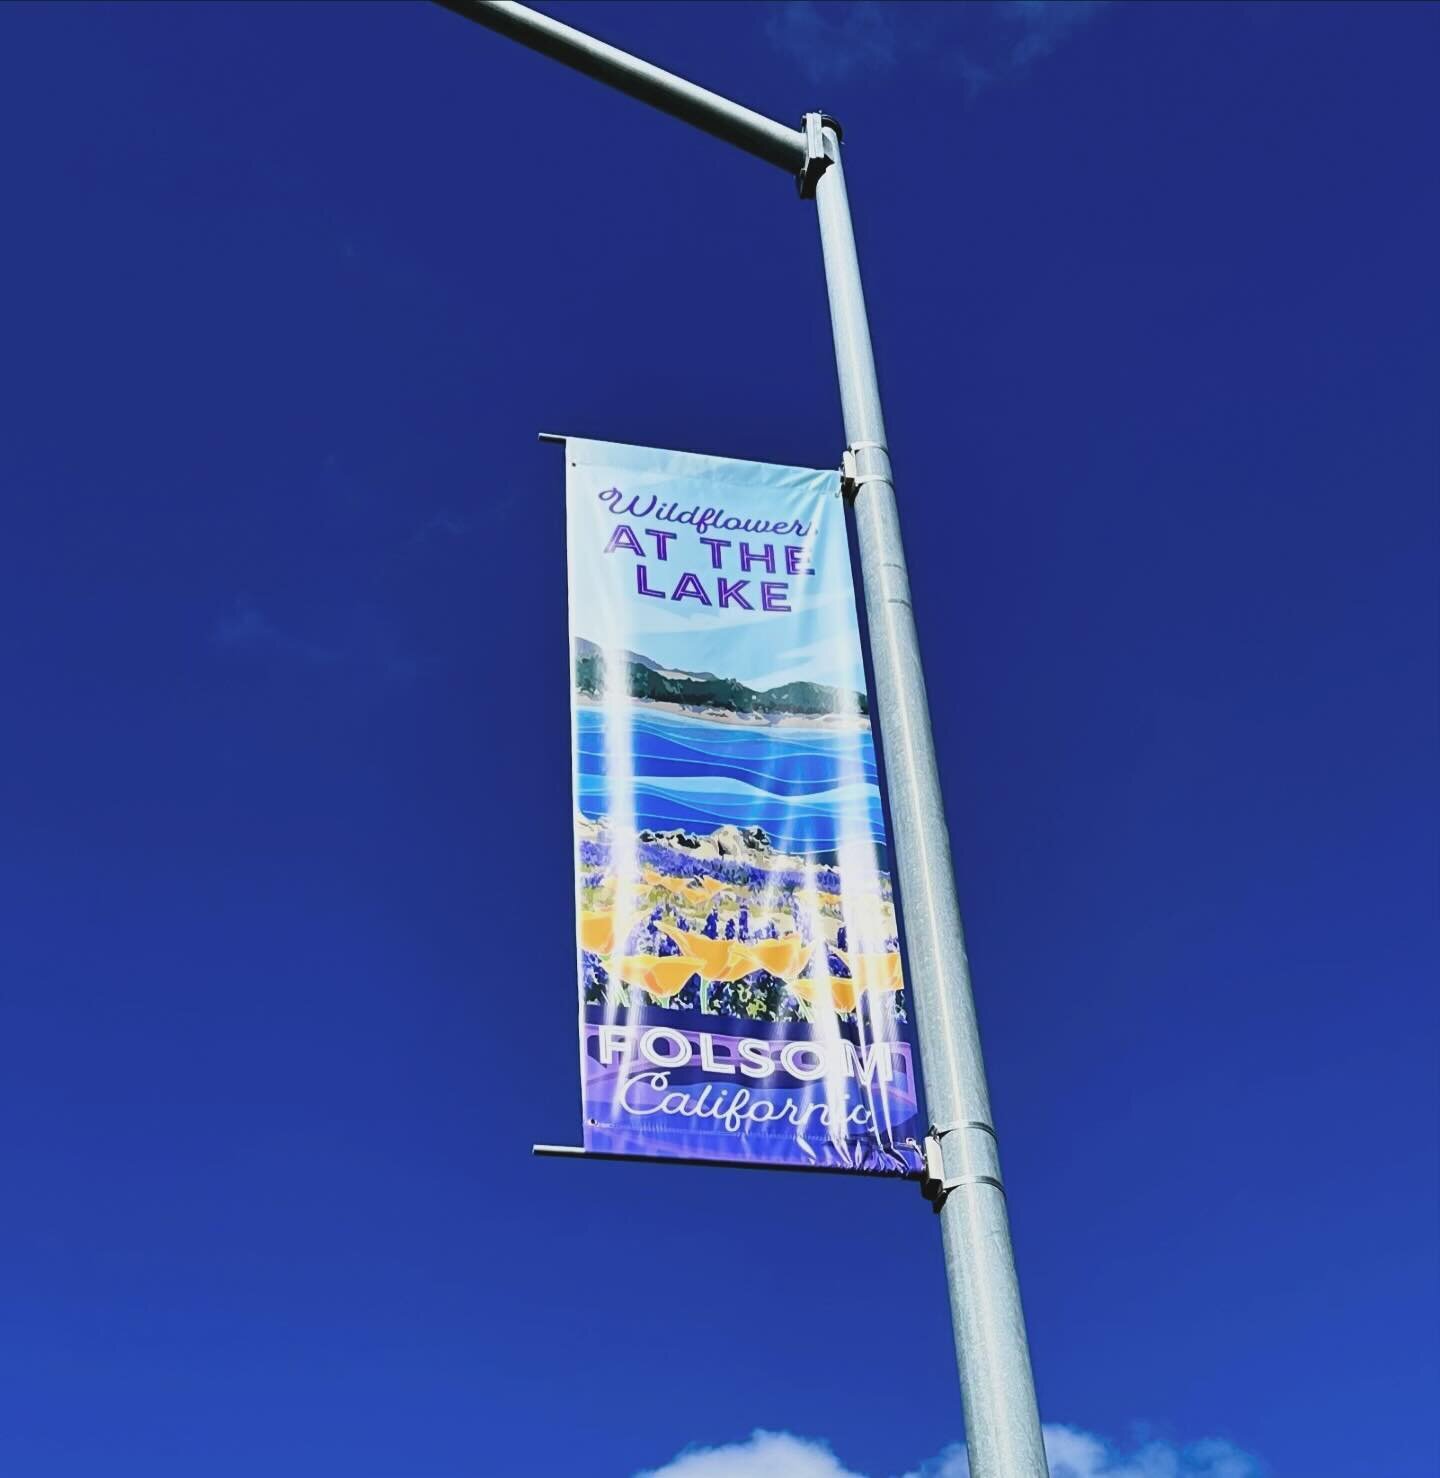 Went for a walk this AM across Folsom Lake Crossing and it is just awesome to see these banners line the trail. This banner hits all the right notes on a spring day like today.